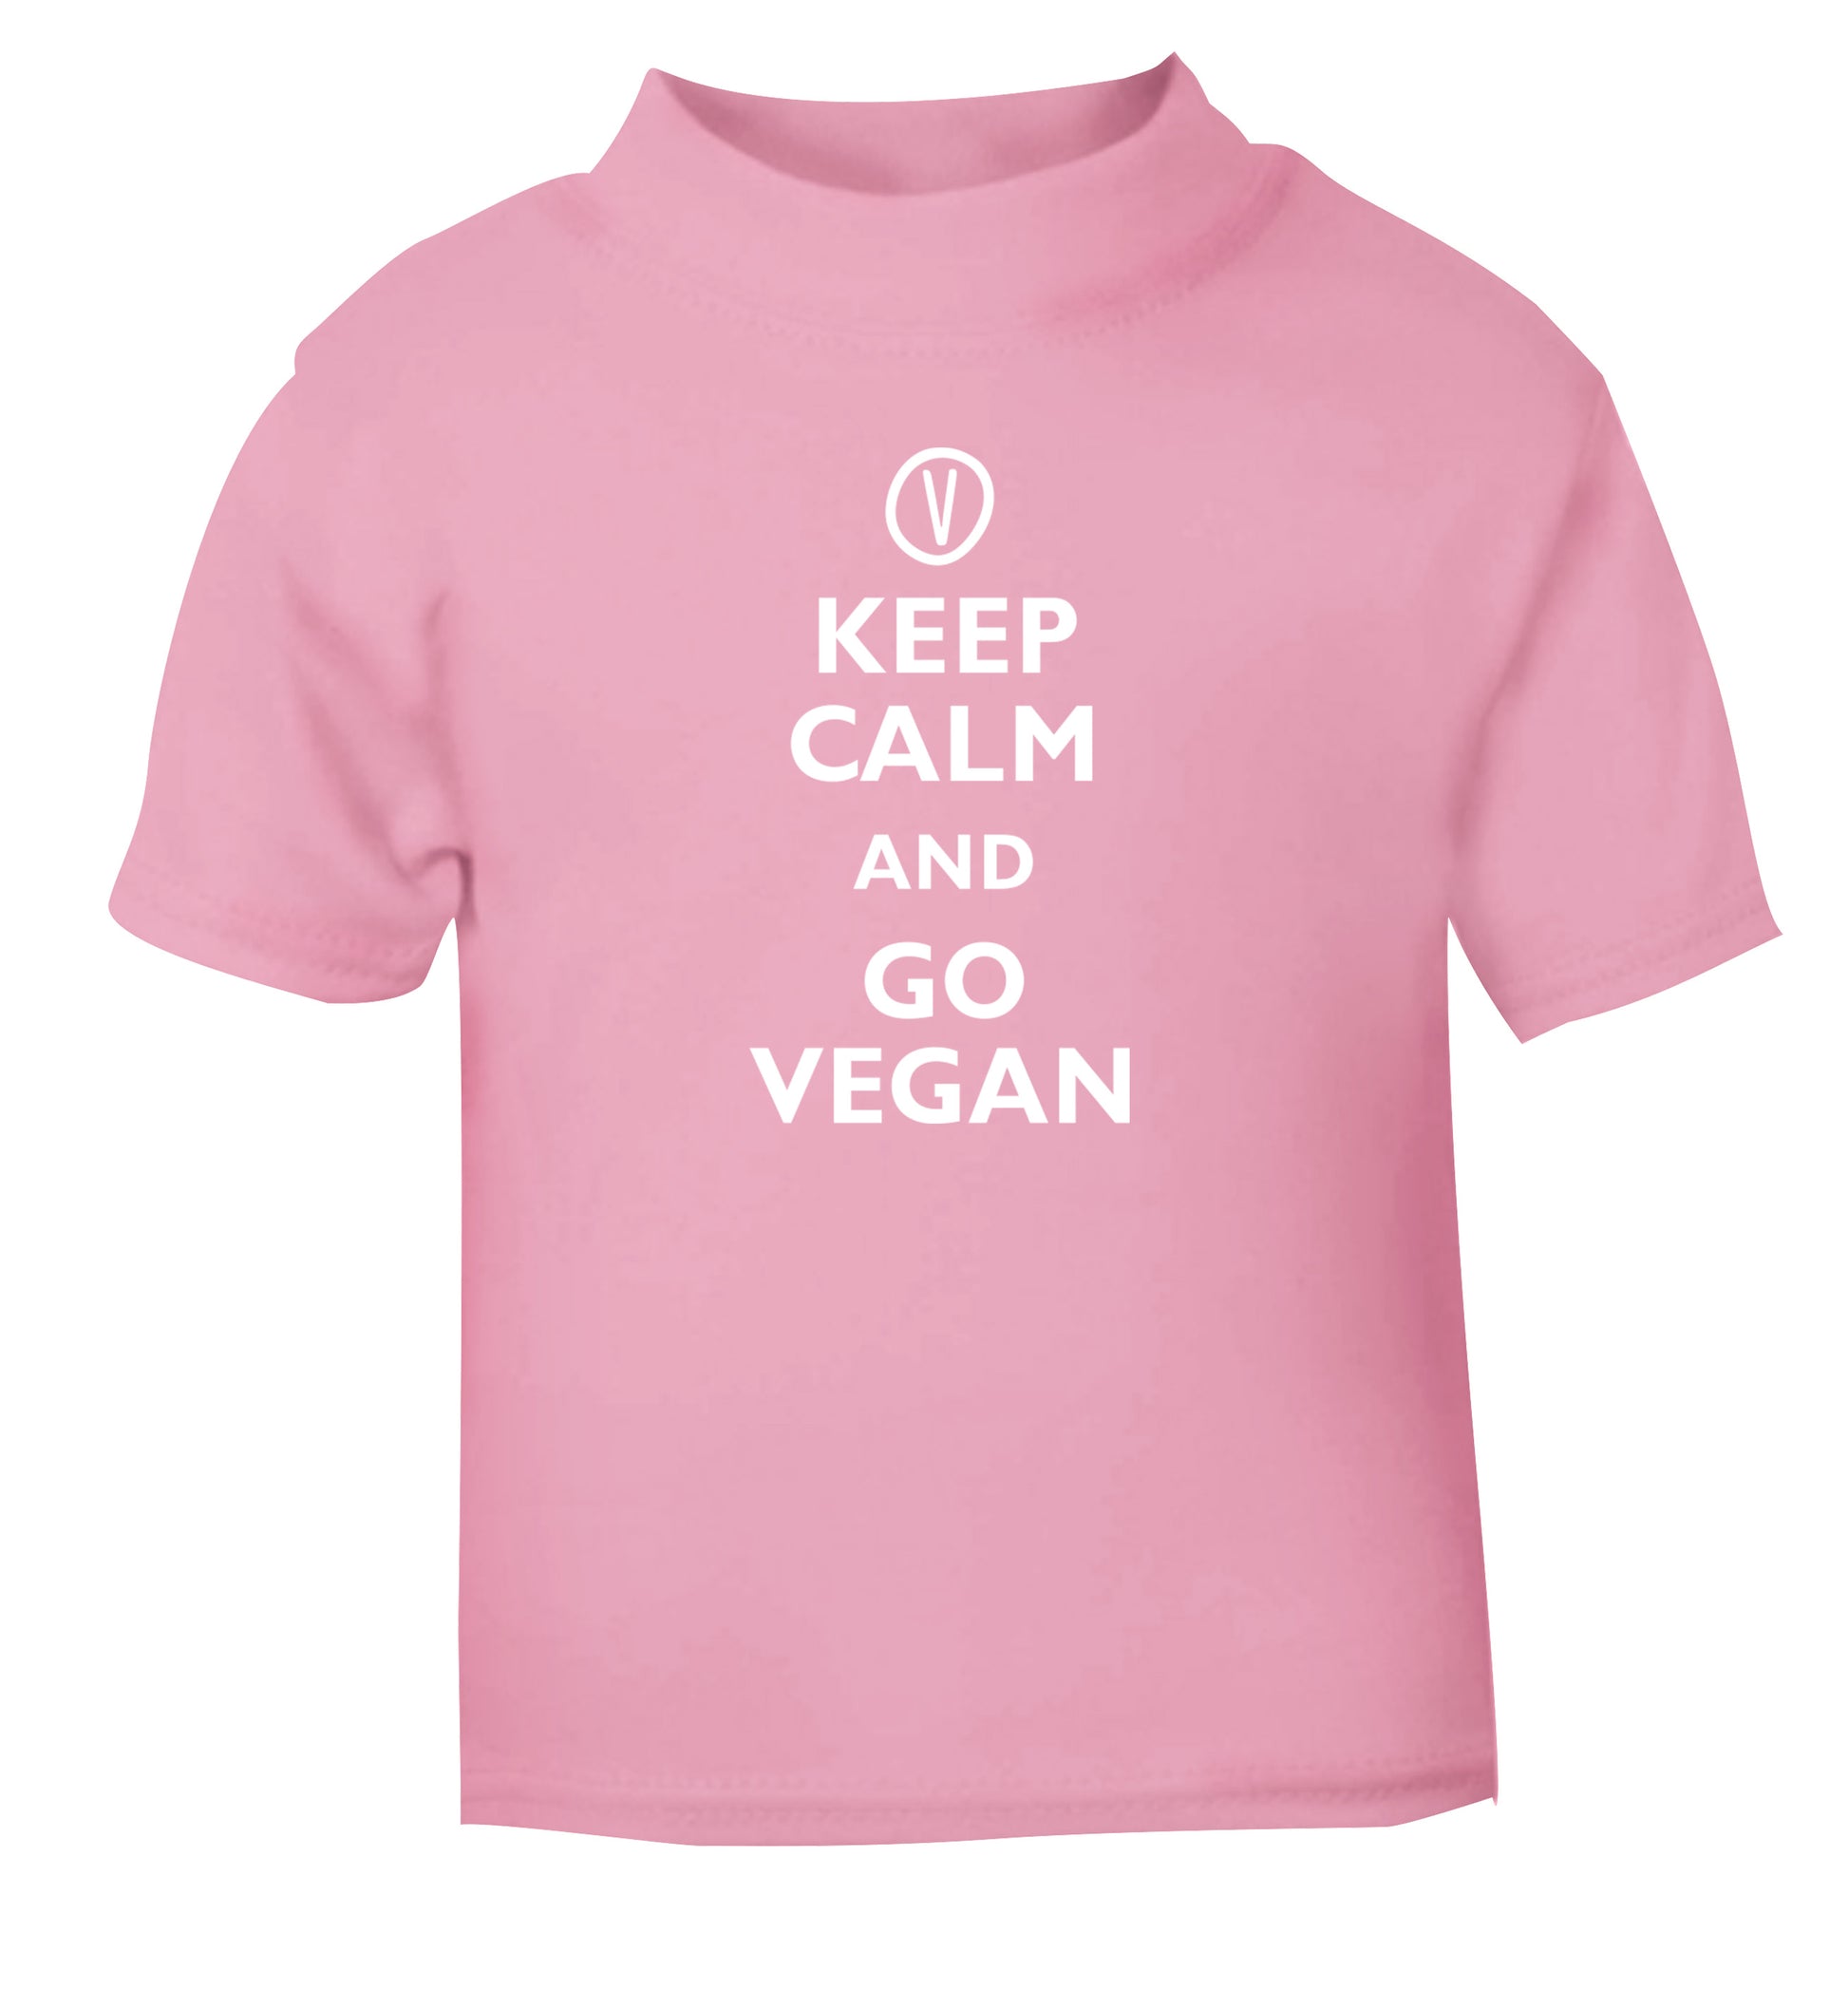 Keep calm and go vegan light pink Baby Toddler Tshirt 2 Years